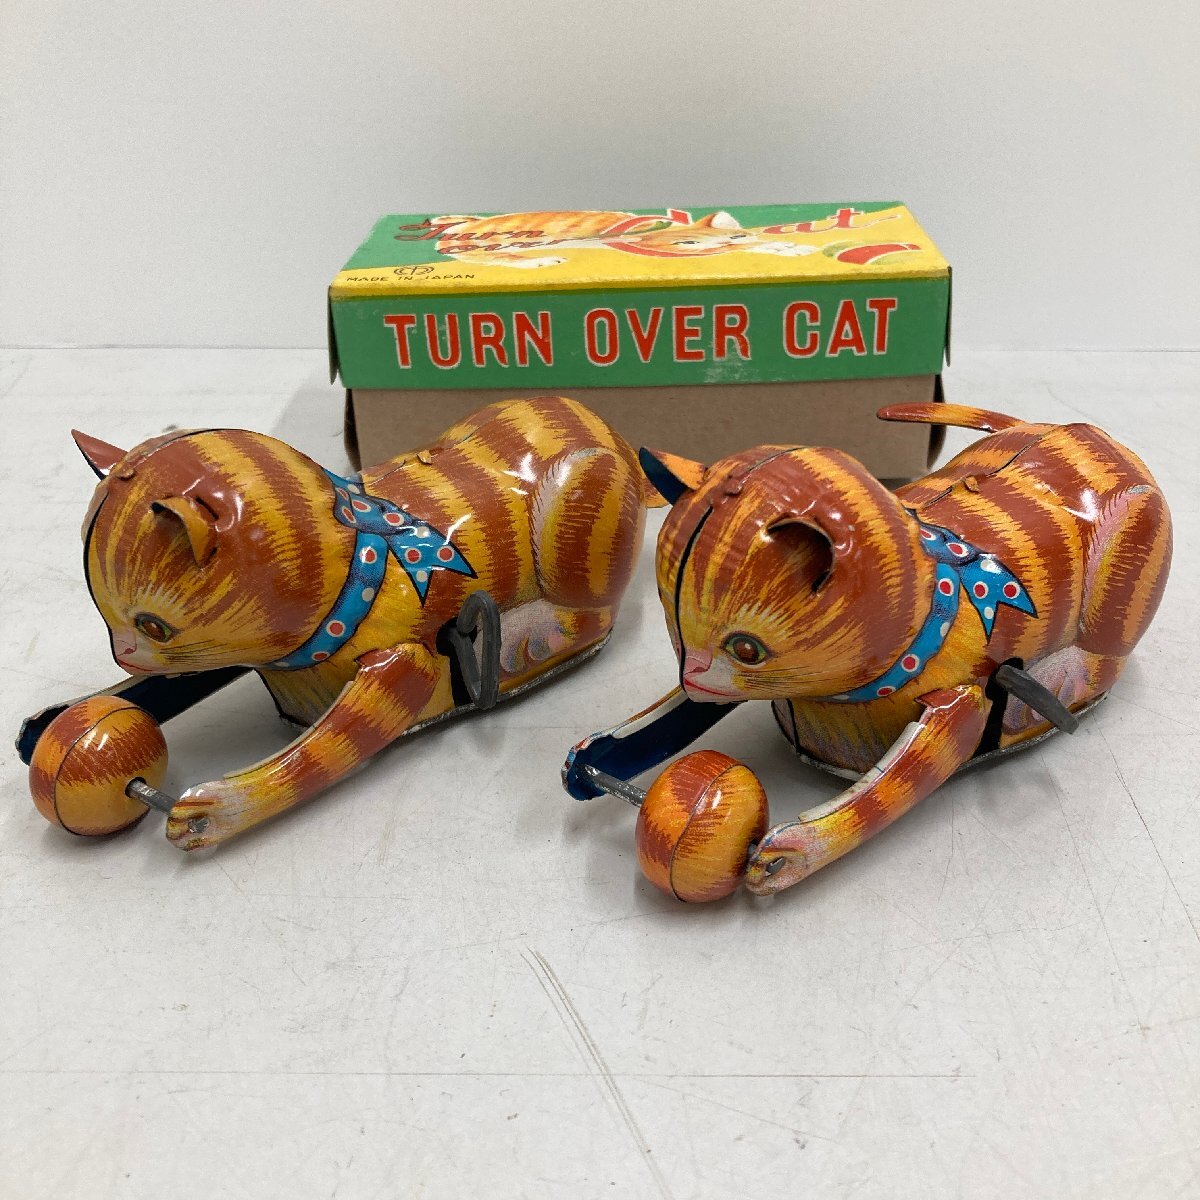 **[8] tin plate Turn Over Cat cat 2 point set original box 1 points made in Japan pine fee toy zen my toy present condition goods 06/050808m**